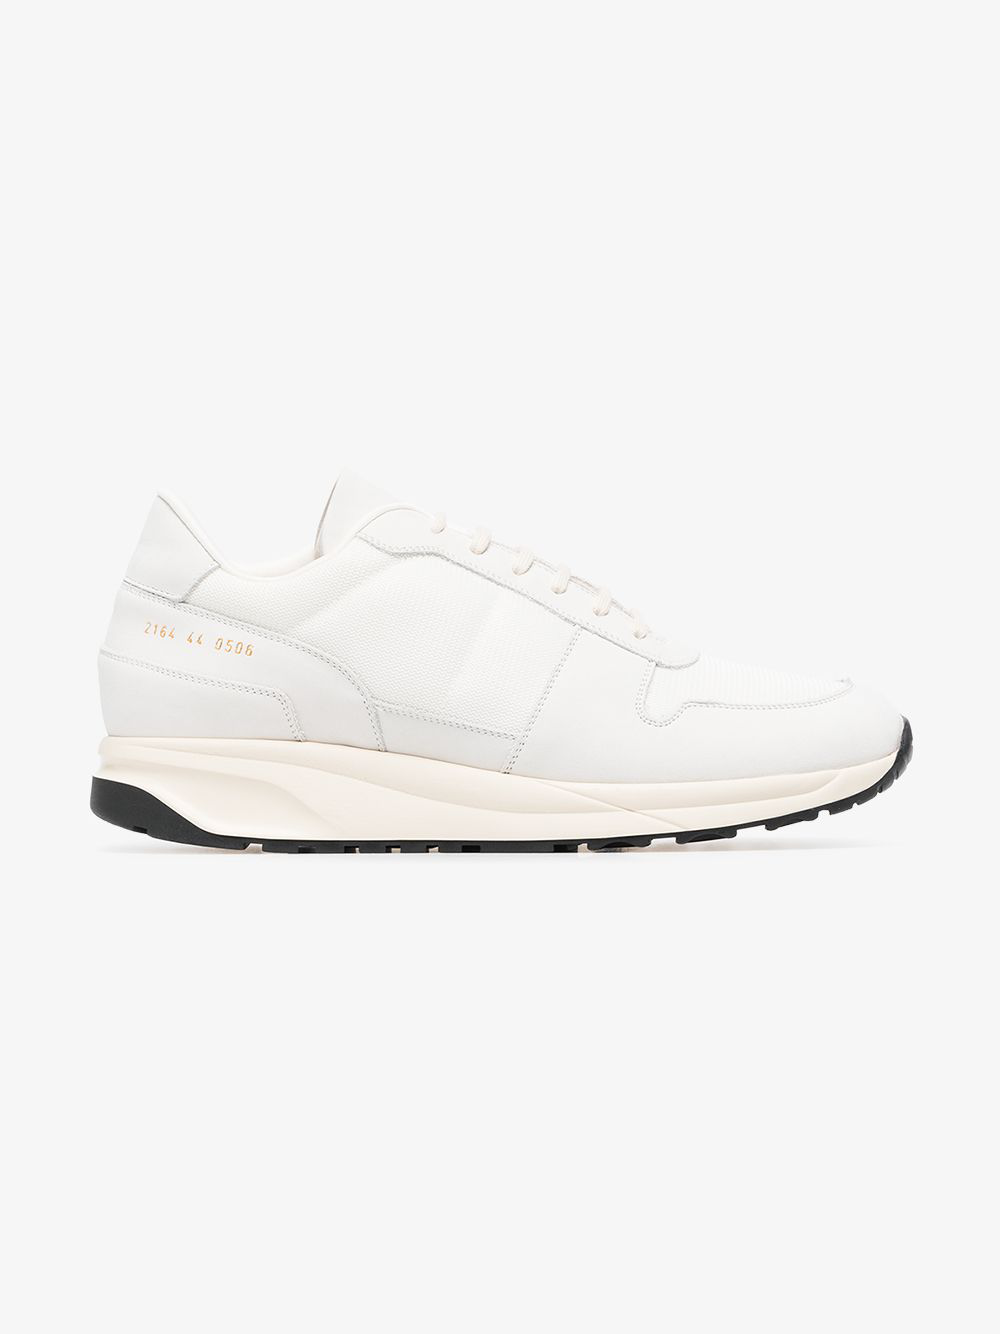 Common Projects Track Vintage White Technical Fabric Sneakers | ModeSens